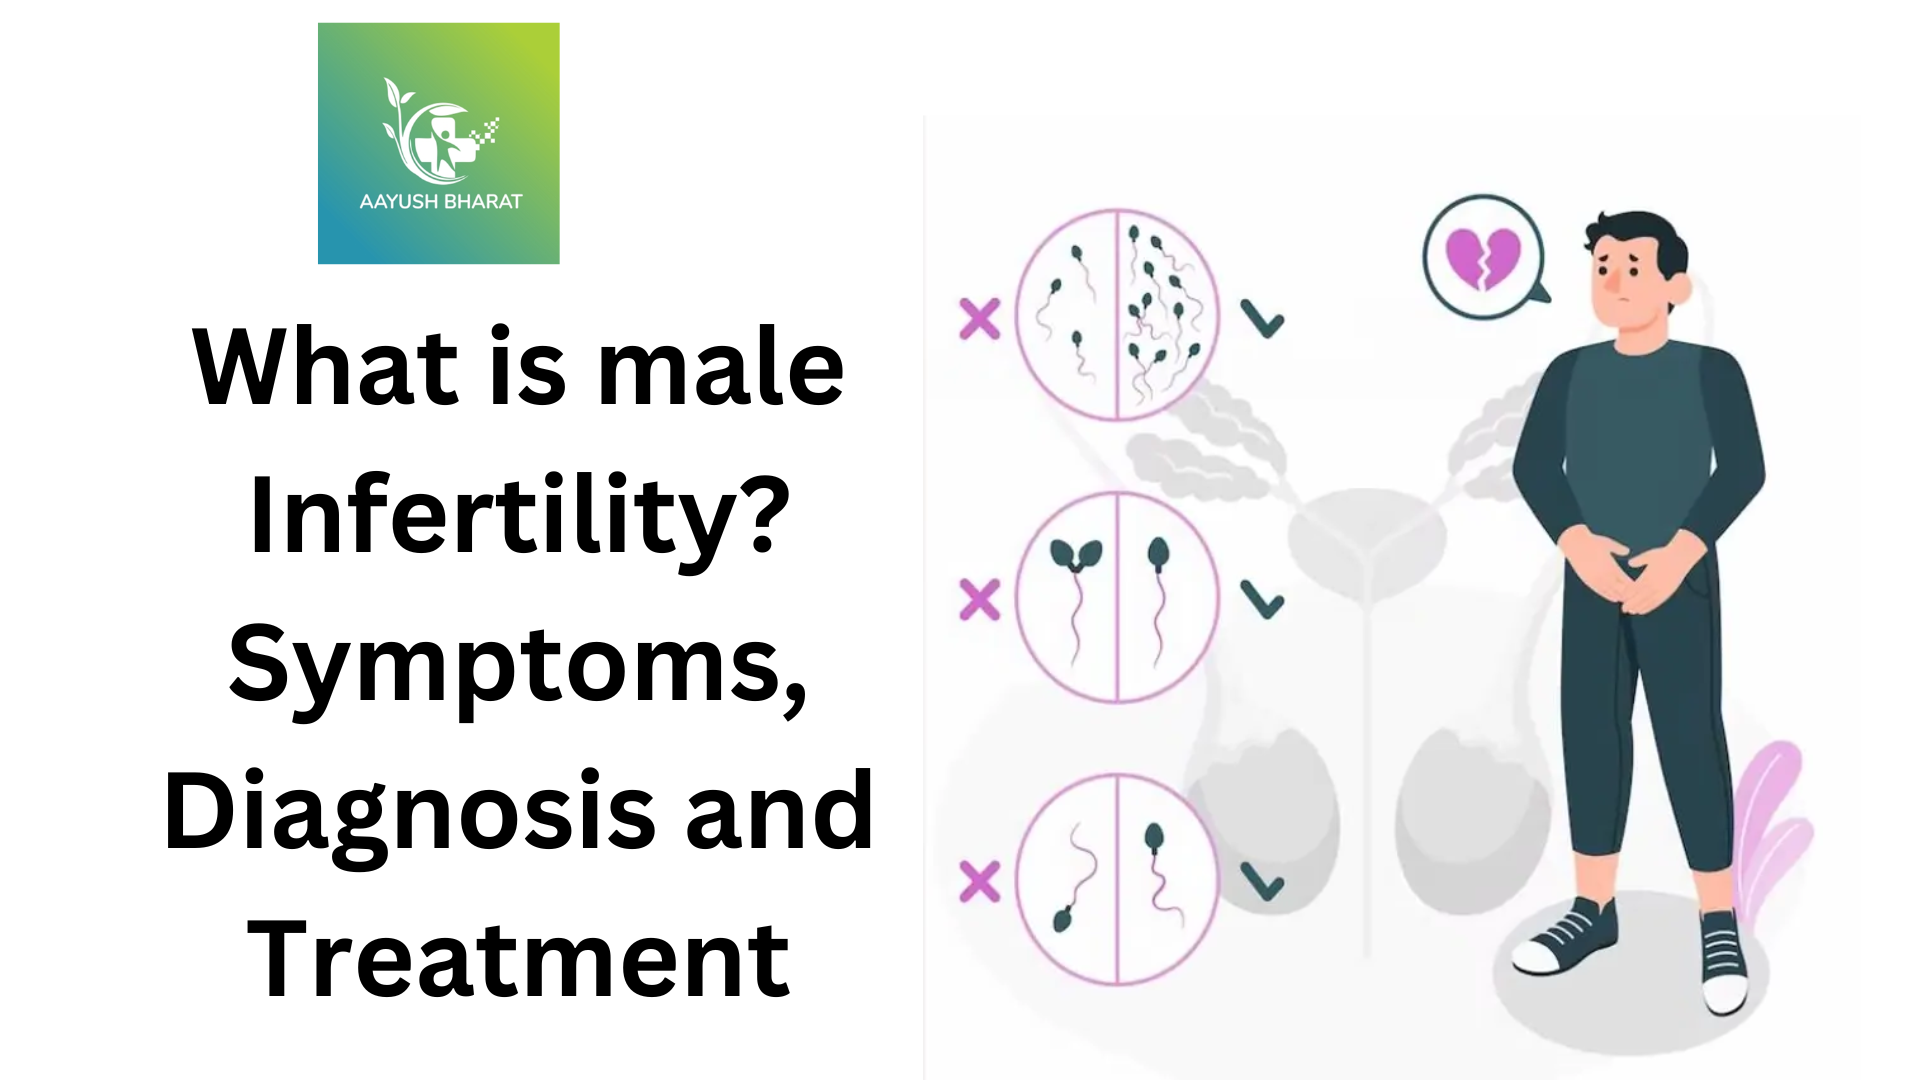 Varicocele: Common Cause of Male Infertility & its Treatment - SCI